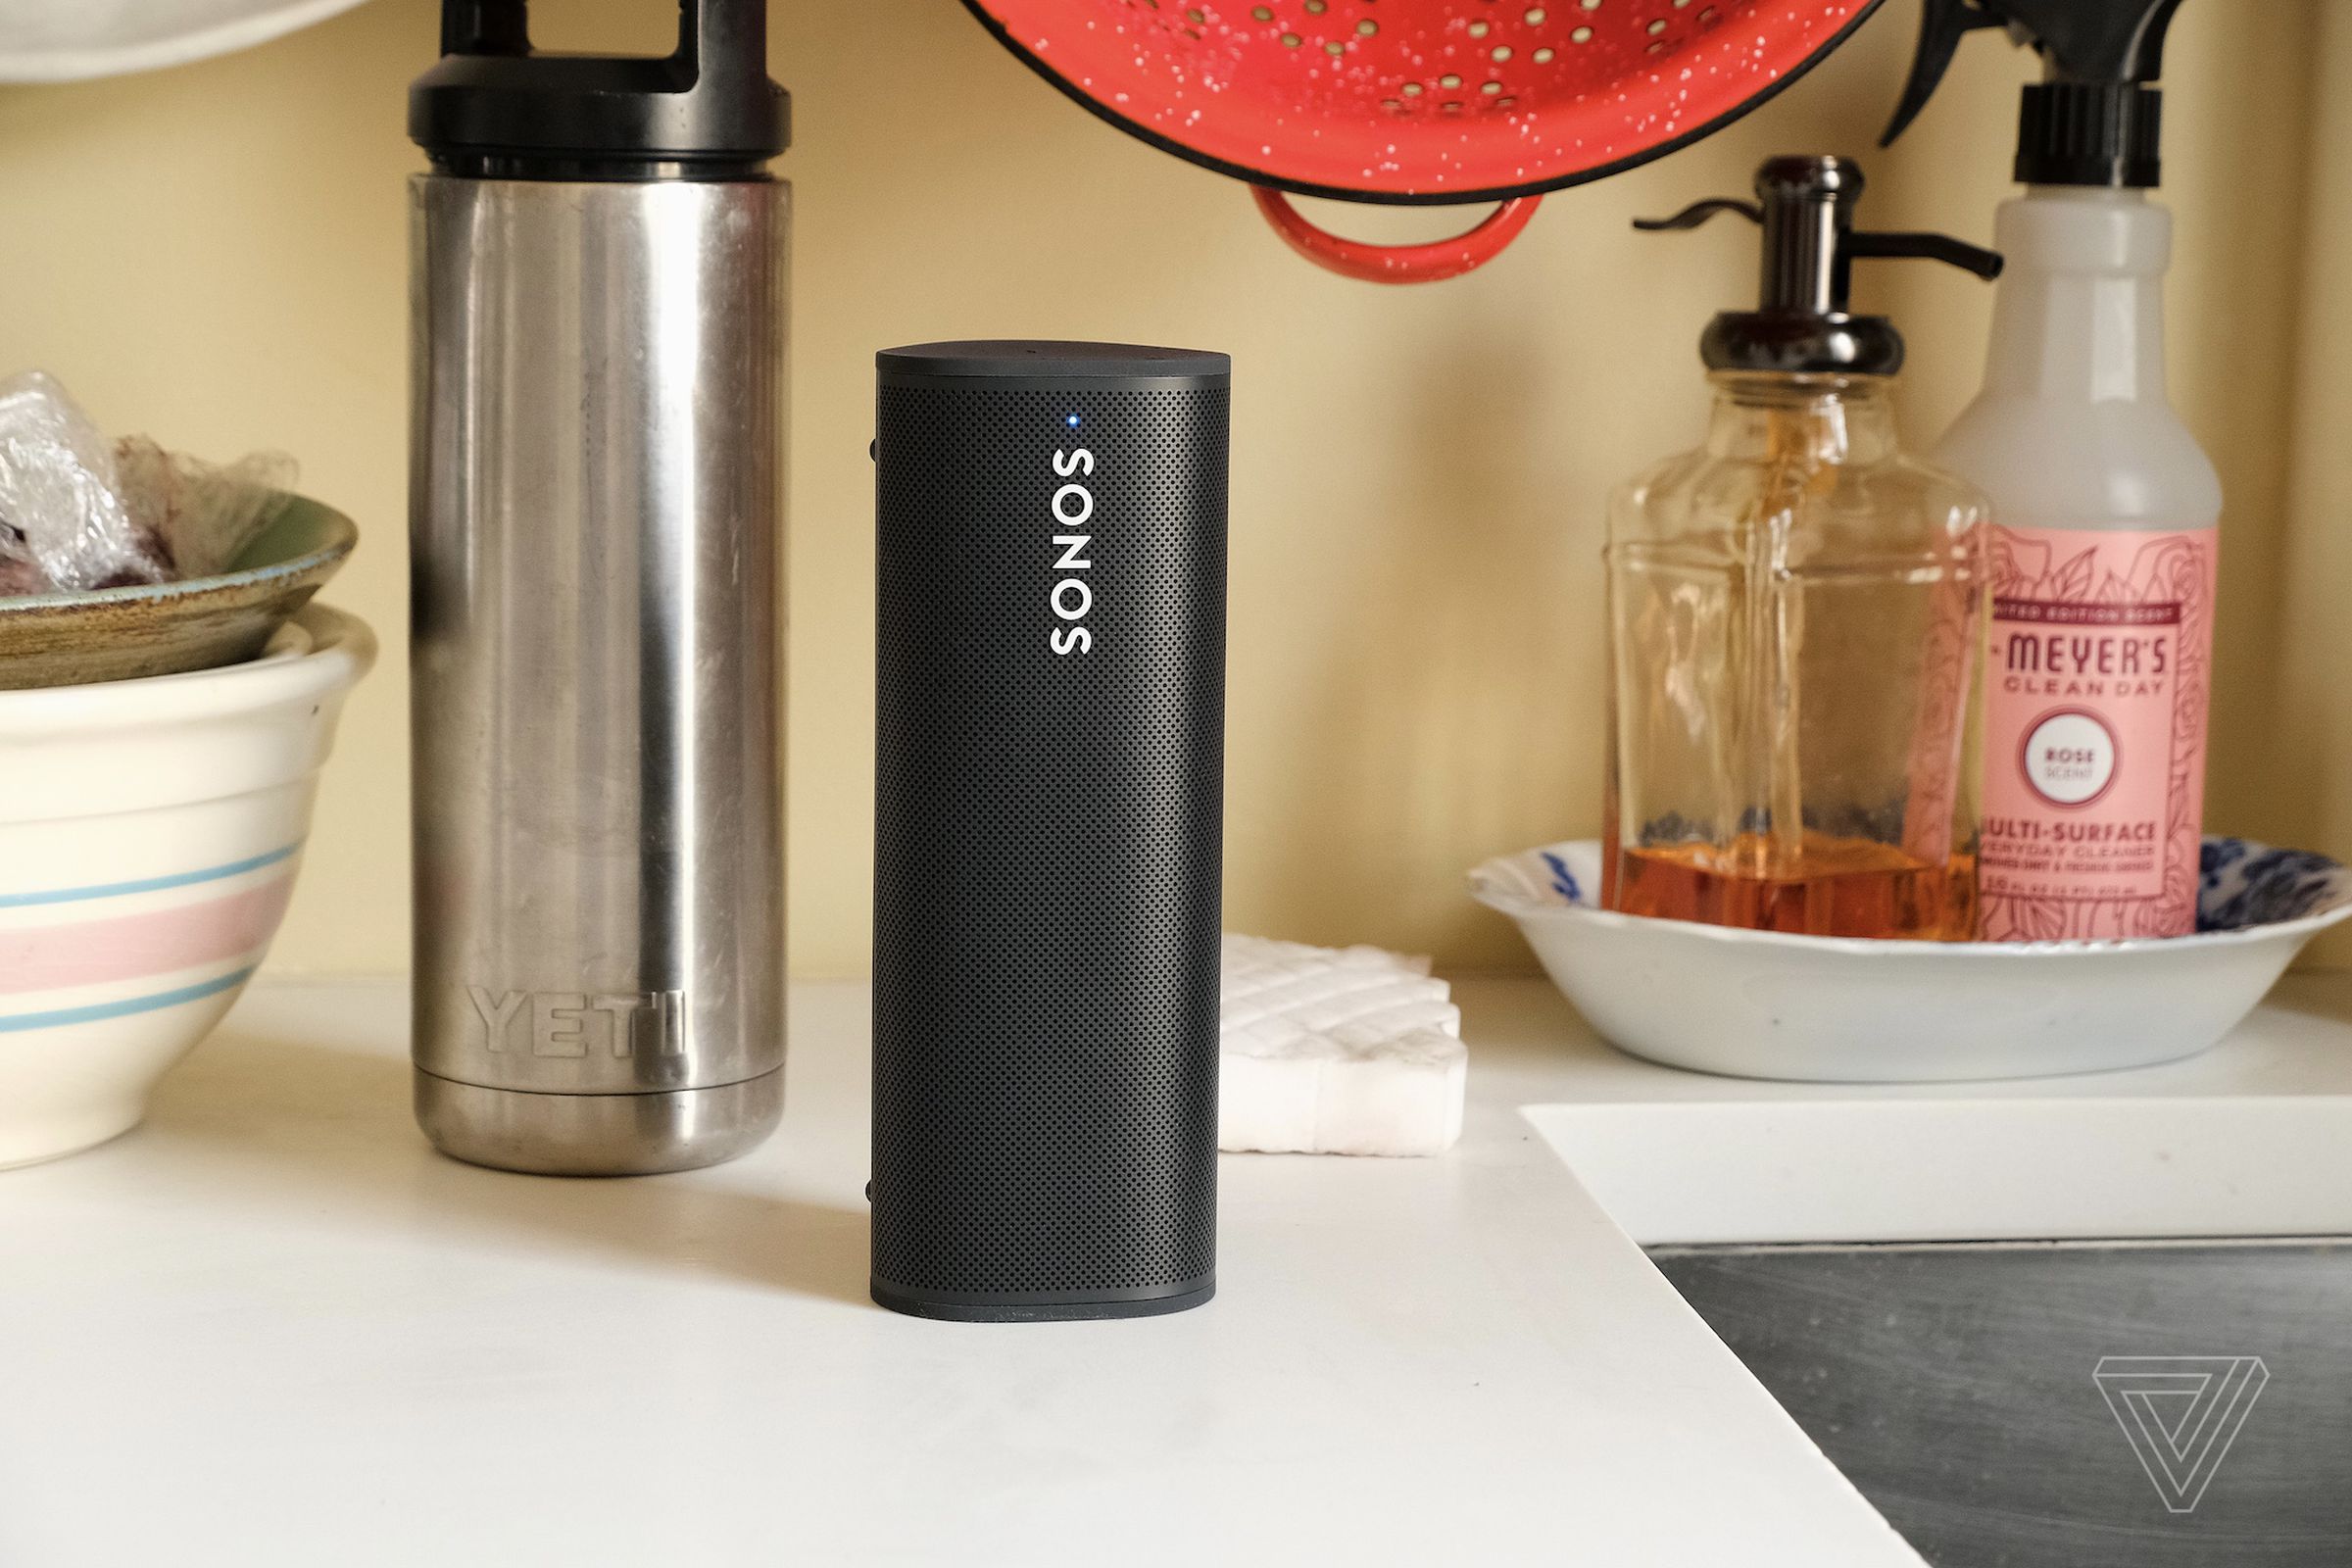 A photo of the Sonos Roam speaker on a kitchen counter.